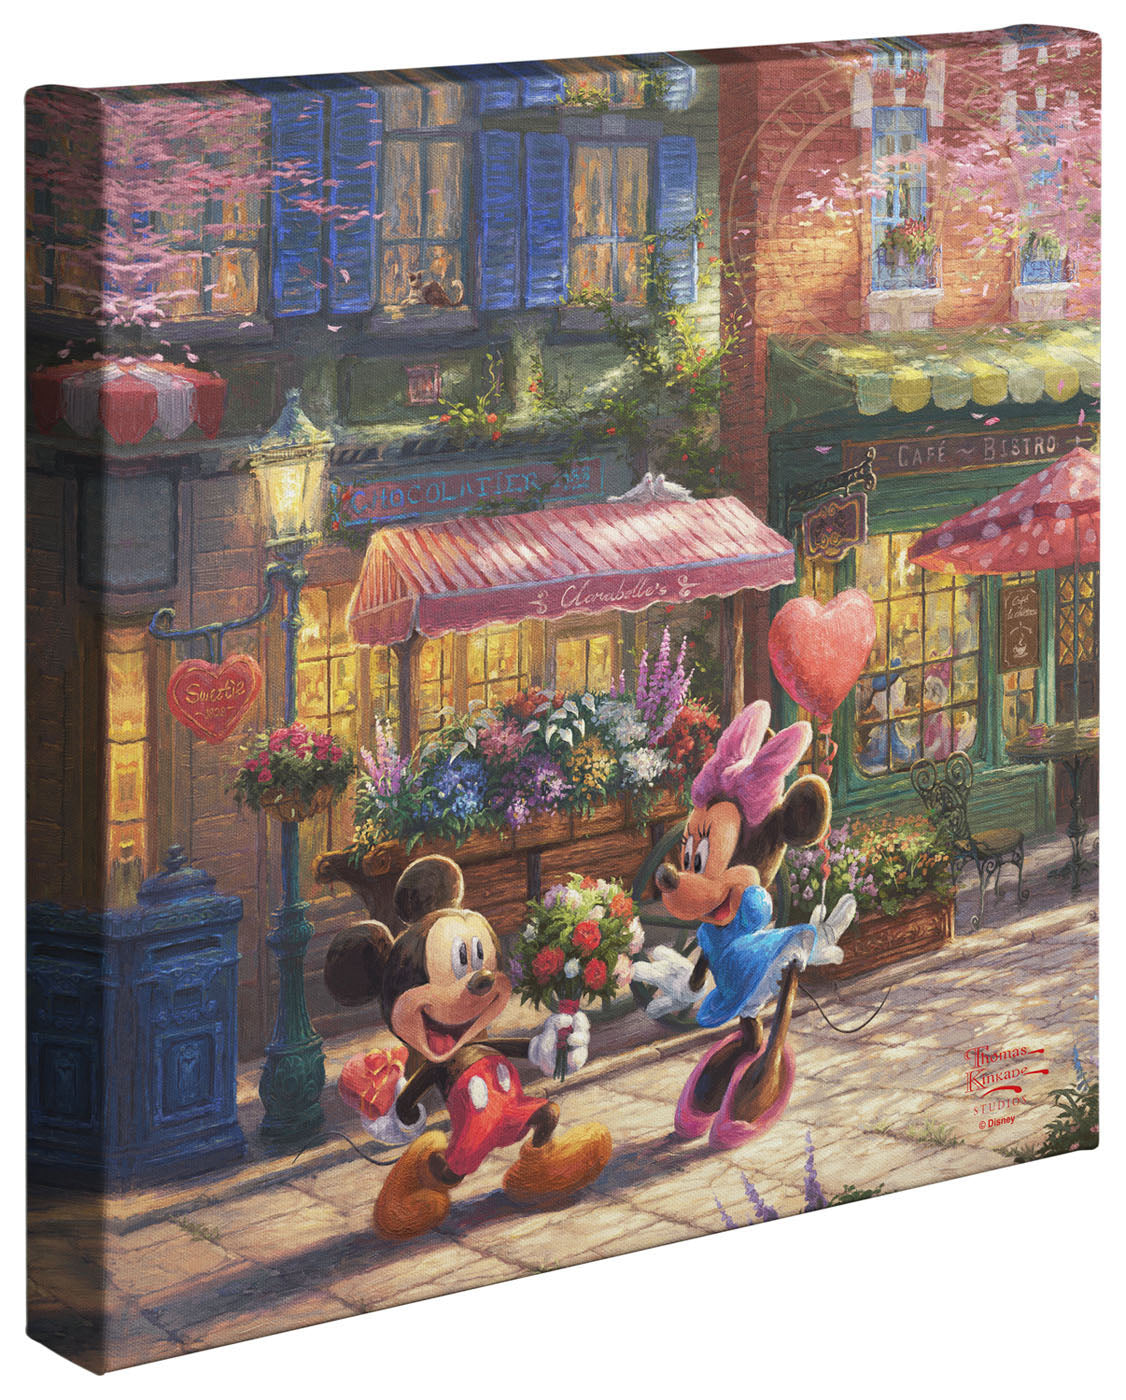 Thomas Kinkade Studios "Mickey and Minnie Sweetheart Cafe" Limited and Open Canvas Giclee